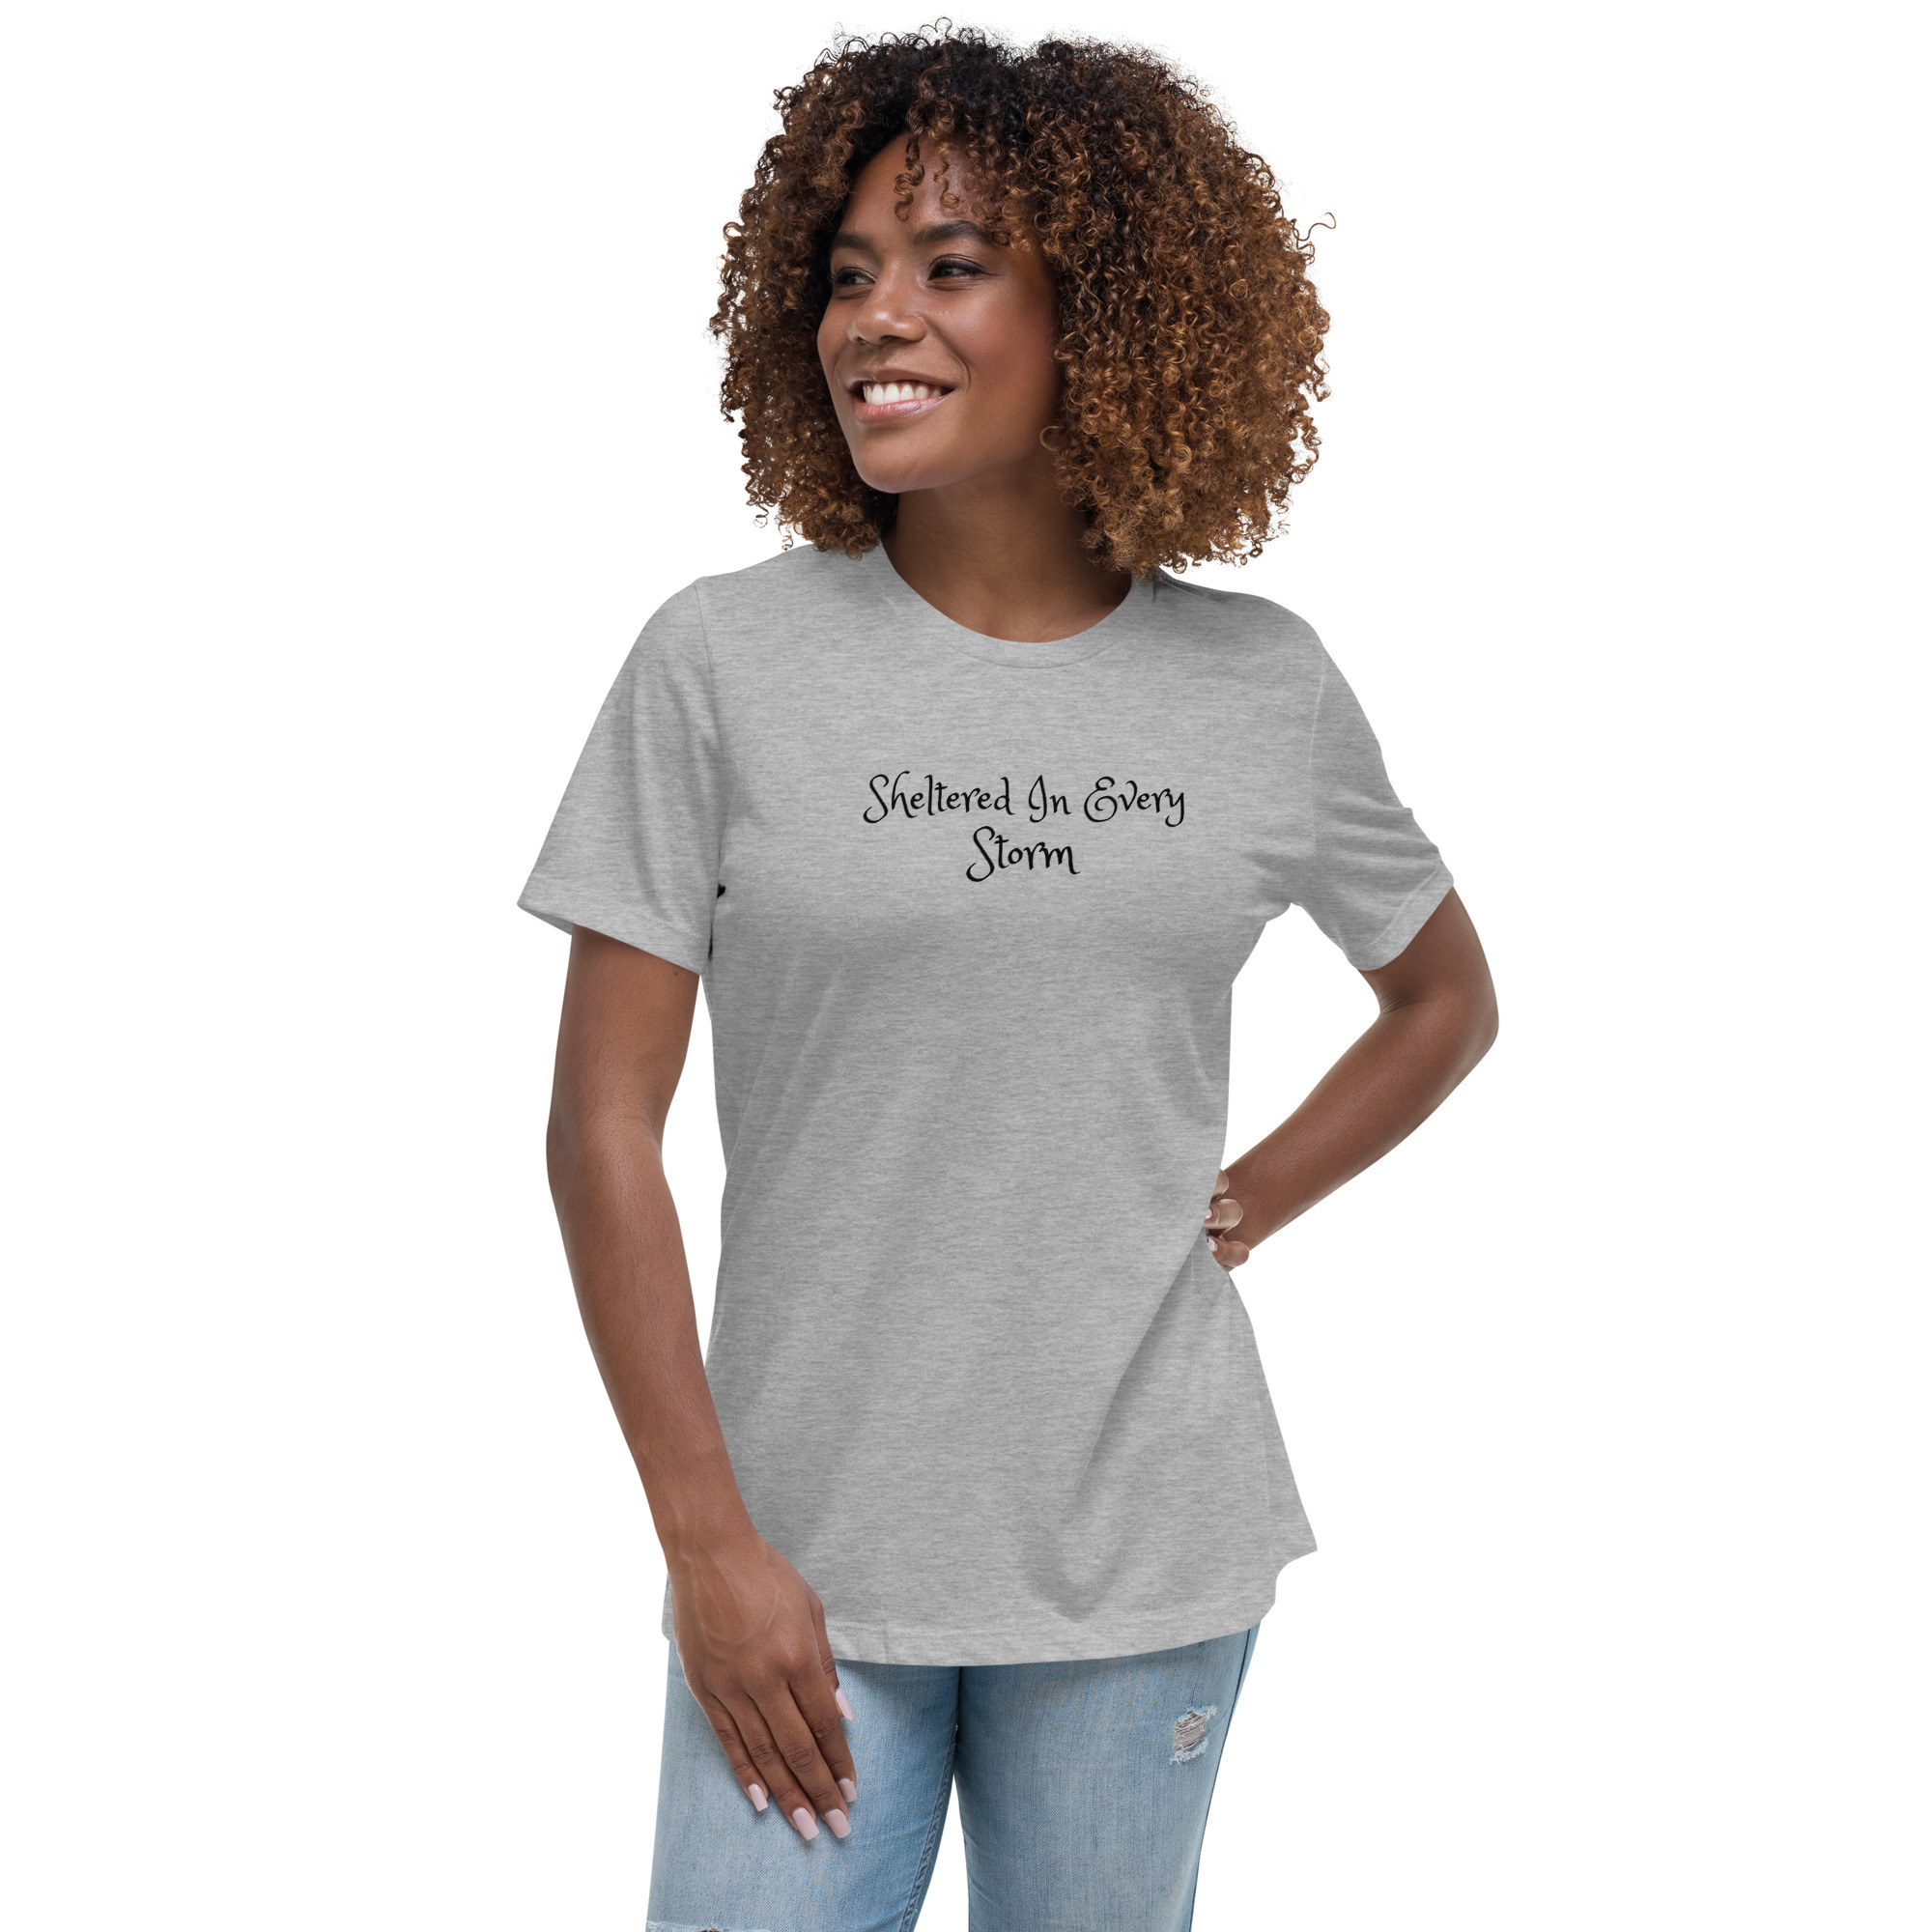 womens-relaxed-t-shirt-athletic-heather-front-63227a7662b46.jpg